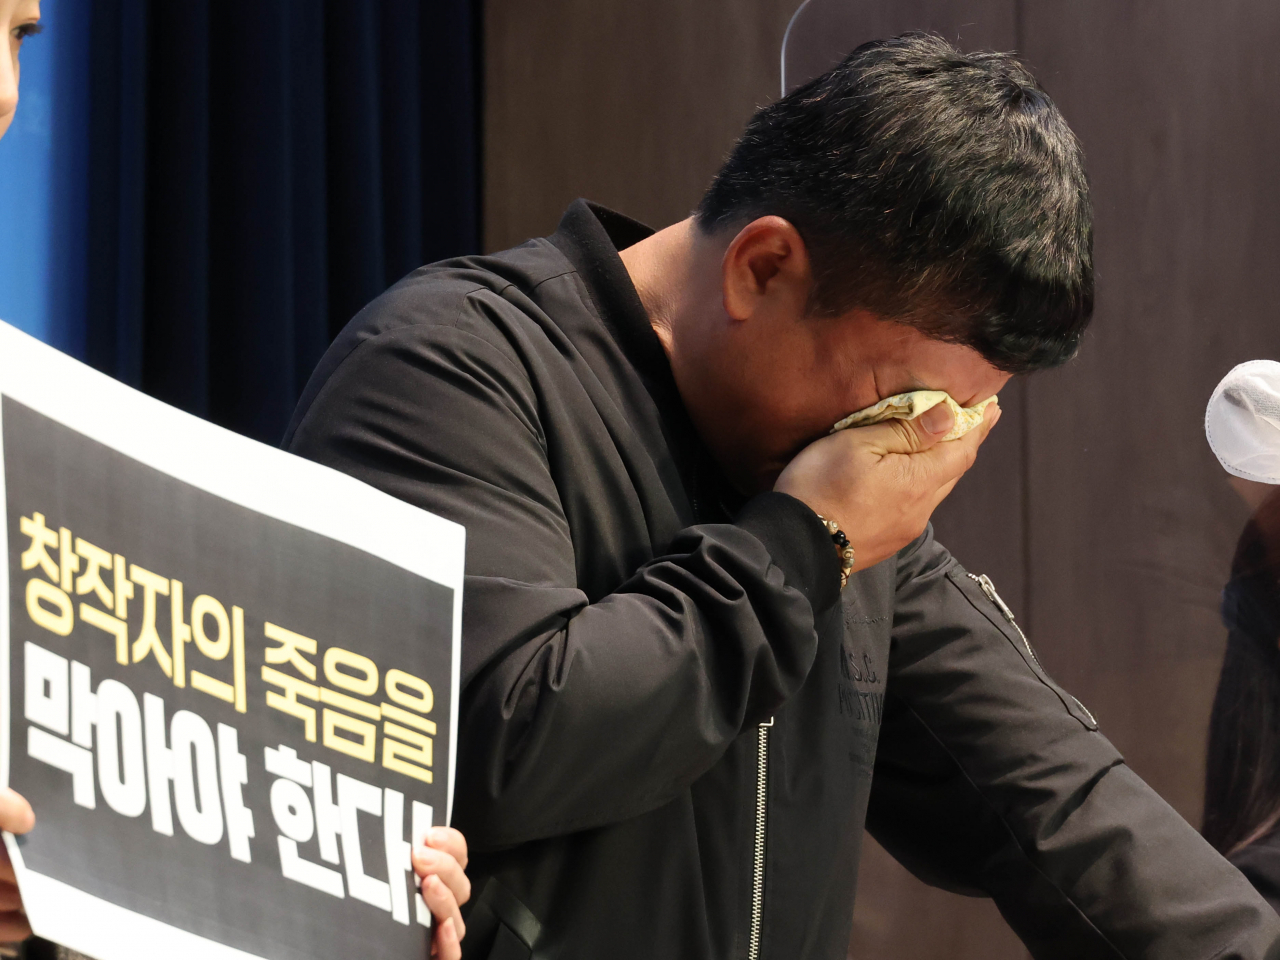 Lee Woo-jin, the co-creator of “Black Rubber Shoes” and the deceased cartoonist Lee Yoo-young's younger brother, gets emotional during a press conference at the National Assembly in Seoul on Monday. (Yonhap)